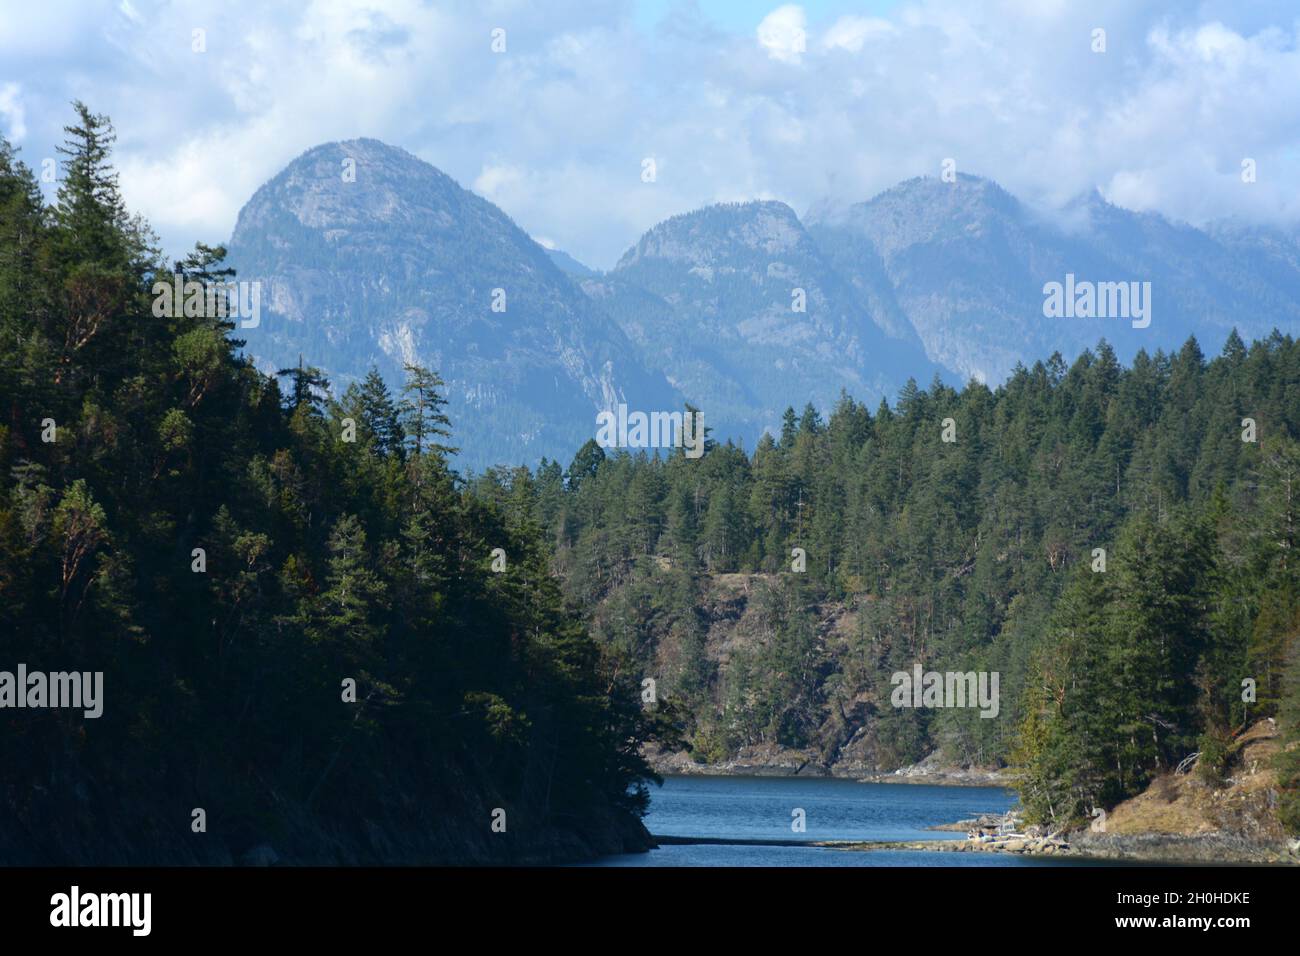 Coast Mountains and temperate rainforest above Jervis Inlet on the Sunshine Coast of British Columbia, Canada. Stock Photo